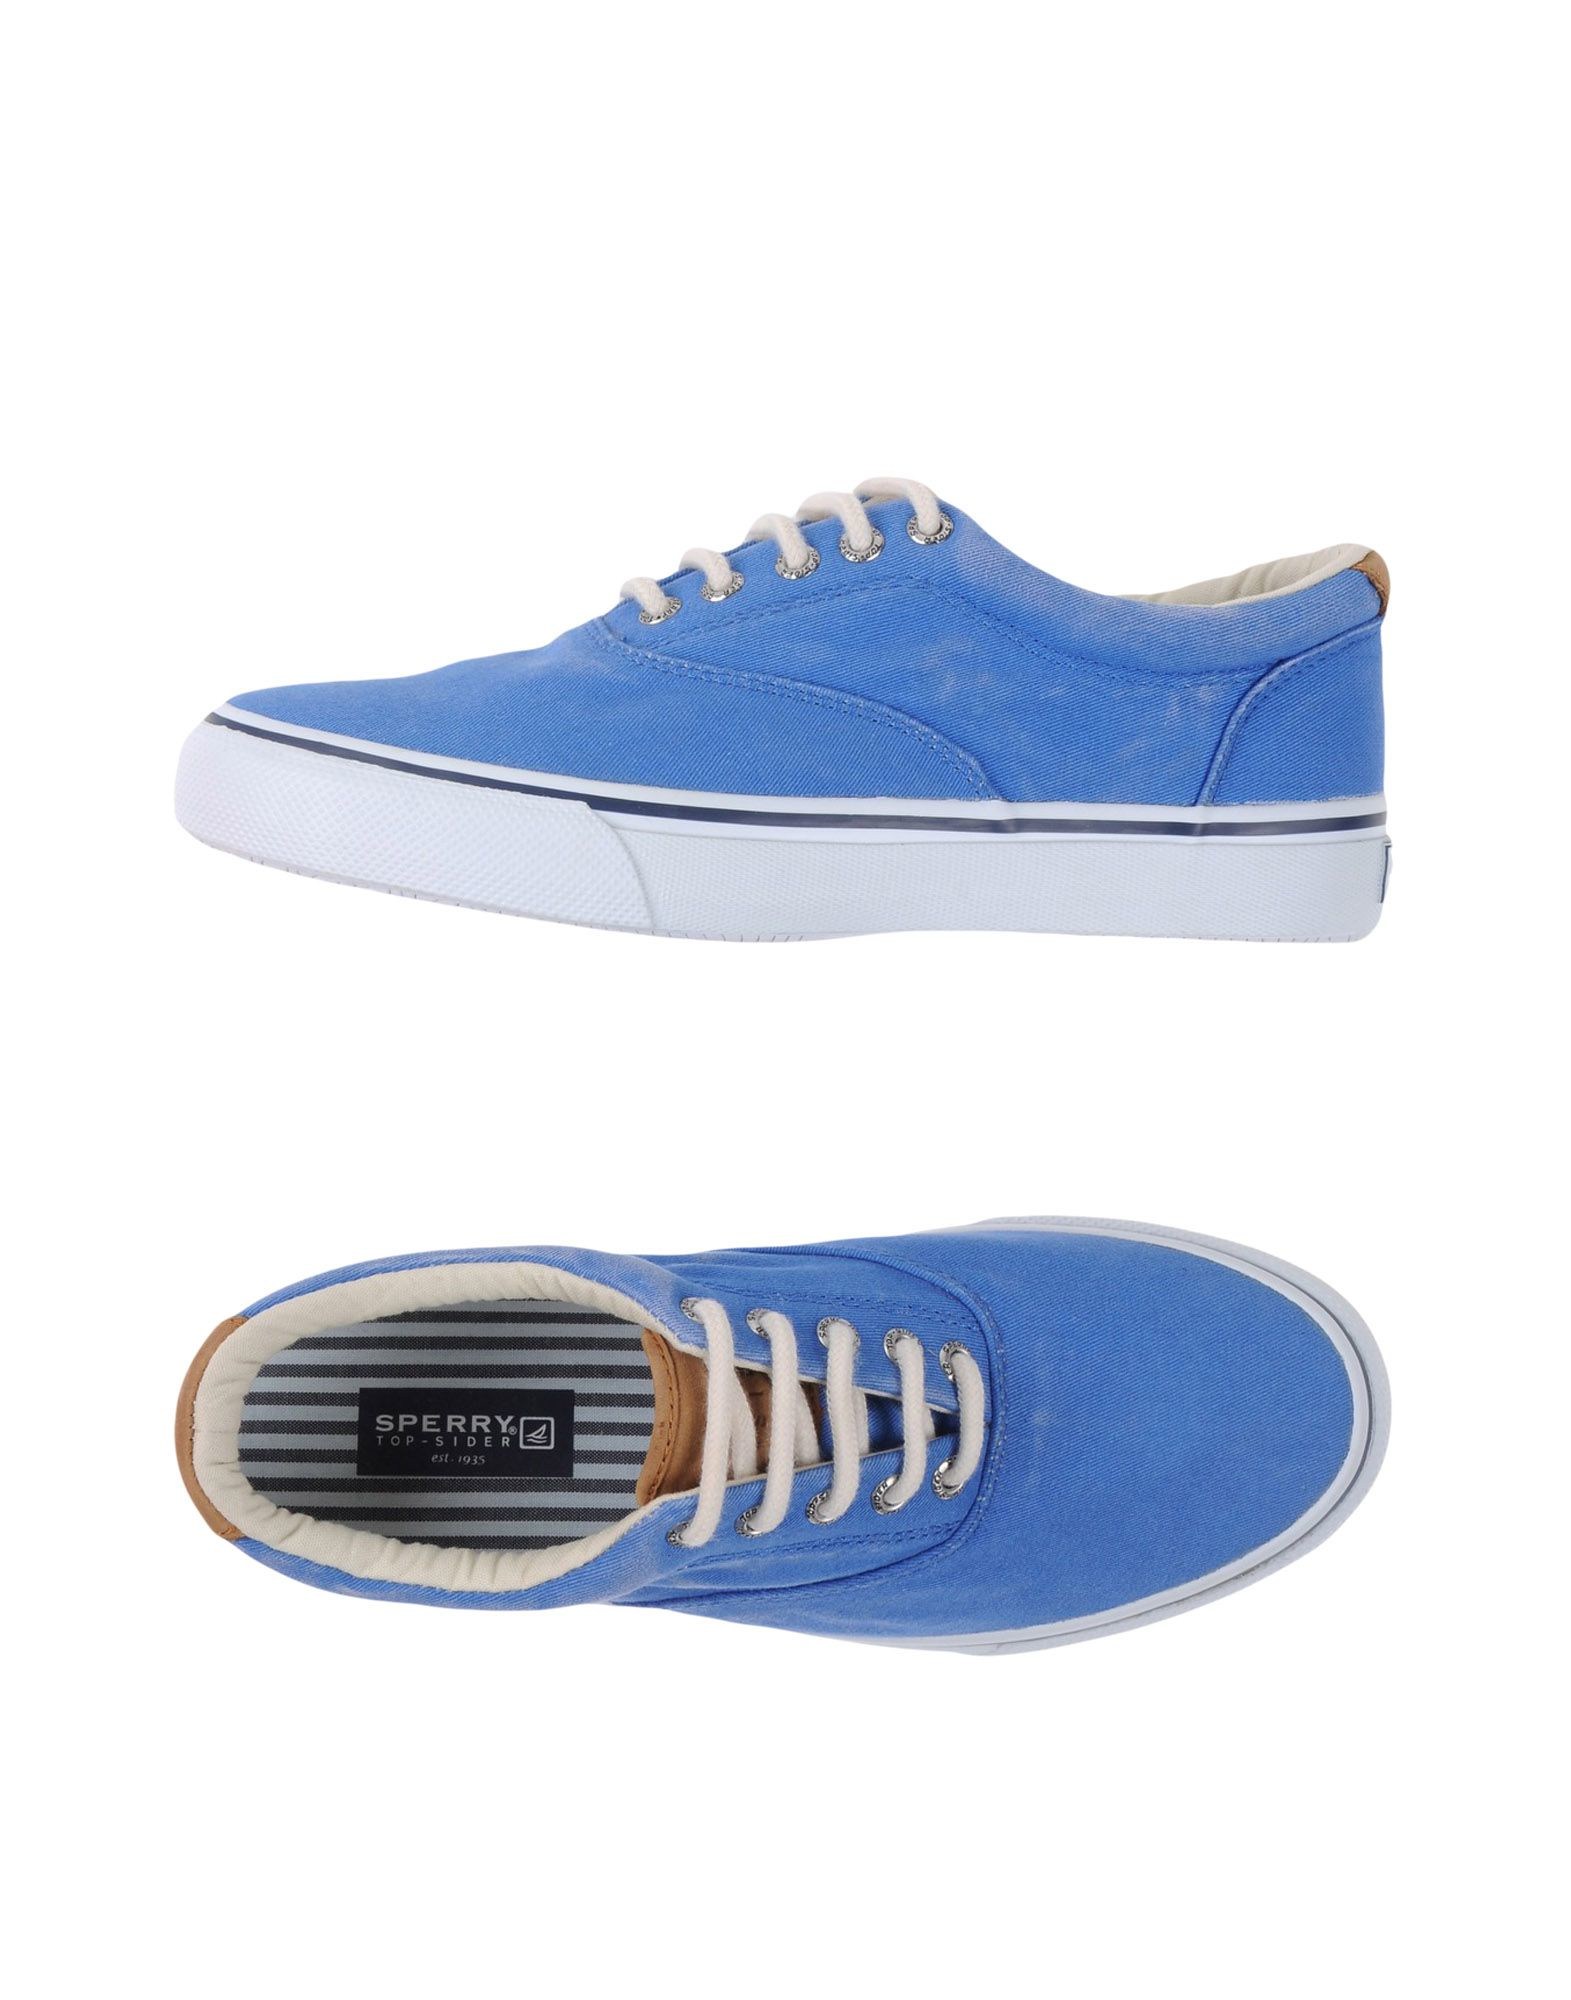 Sperry Top-Sider Low-tops & Sneakers in Blue for Men - Lyst